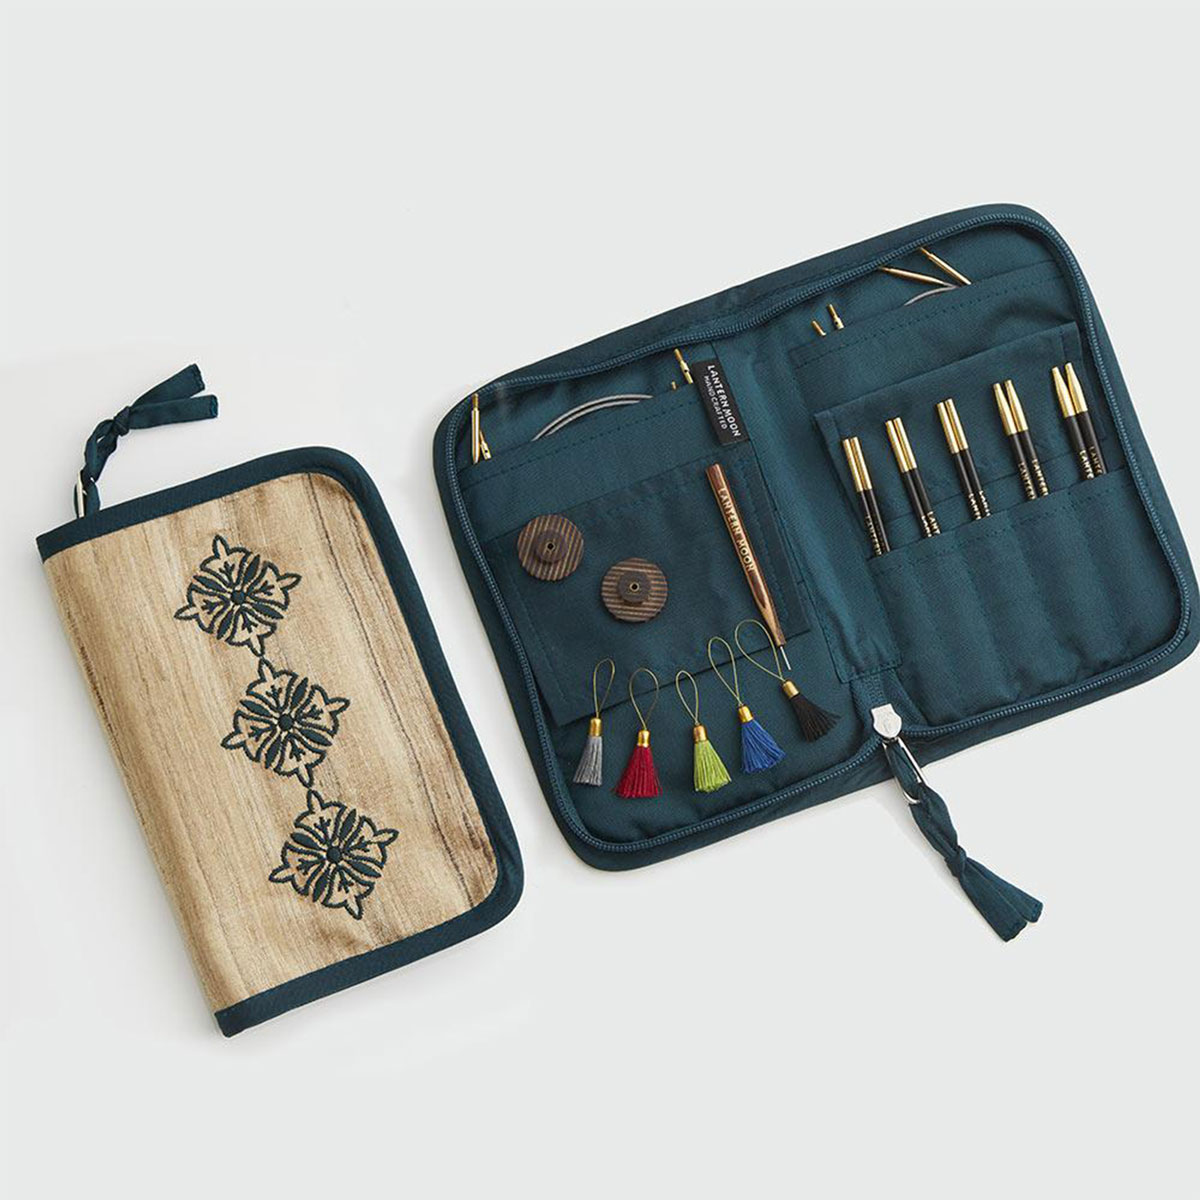  Lantern Moon Heritage 4-Inch 5-Pair Interchangeable Circular  Knitting Needle Set Handcrafted Ebony Sizes US 3, 5, 6, 7, 8, Silk Case, 2  Cords, 4 End Caps, 5 Markers Bundle with 1 Artsiga Crafts Bag